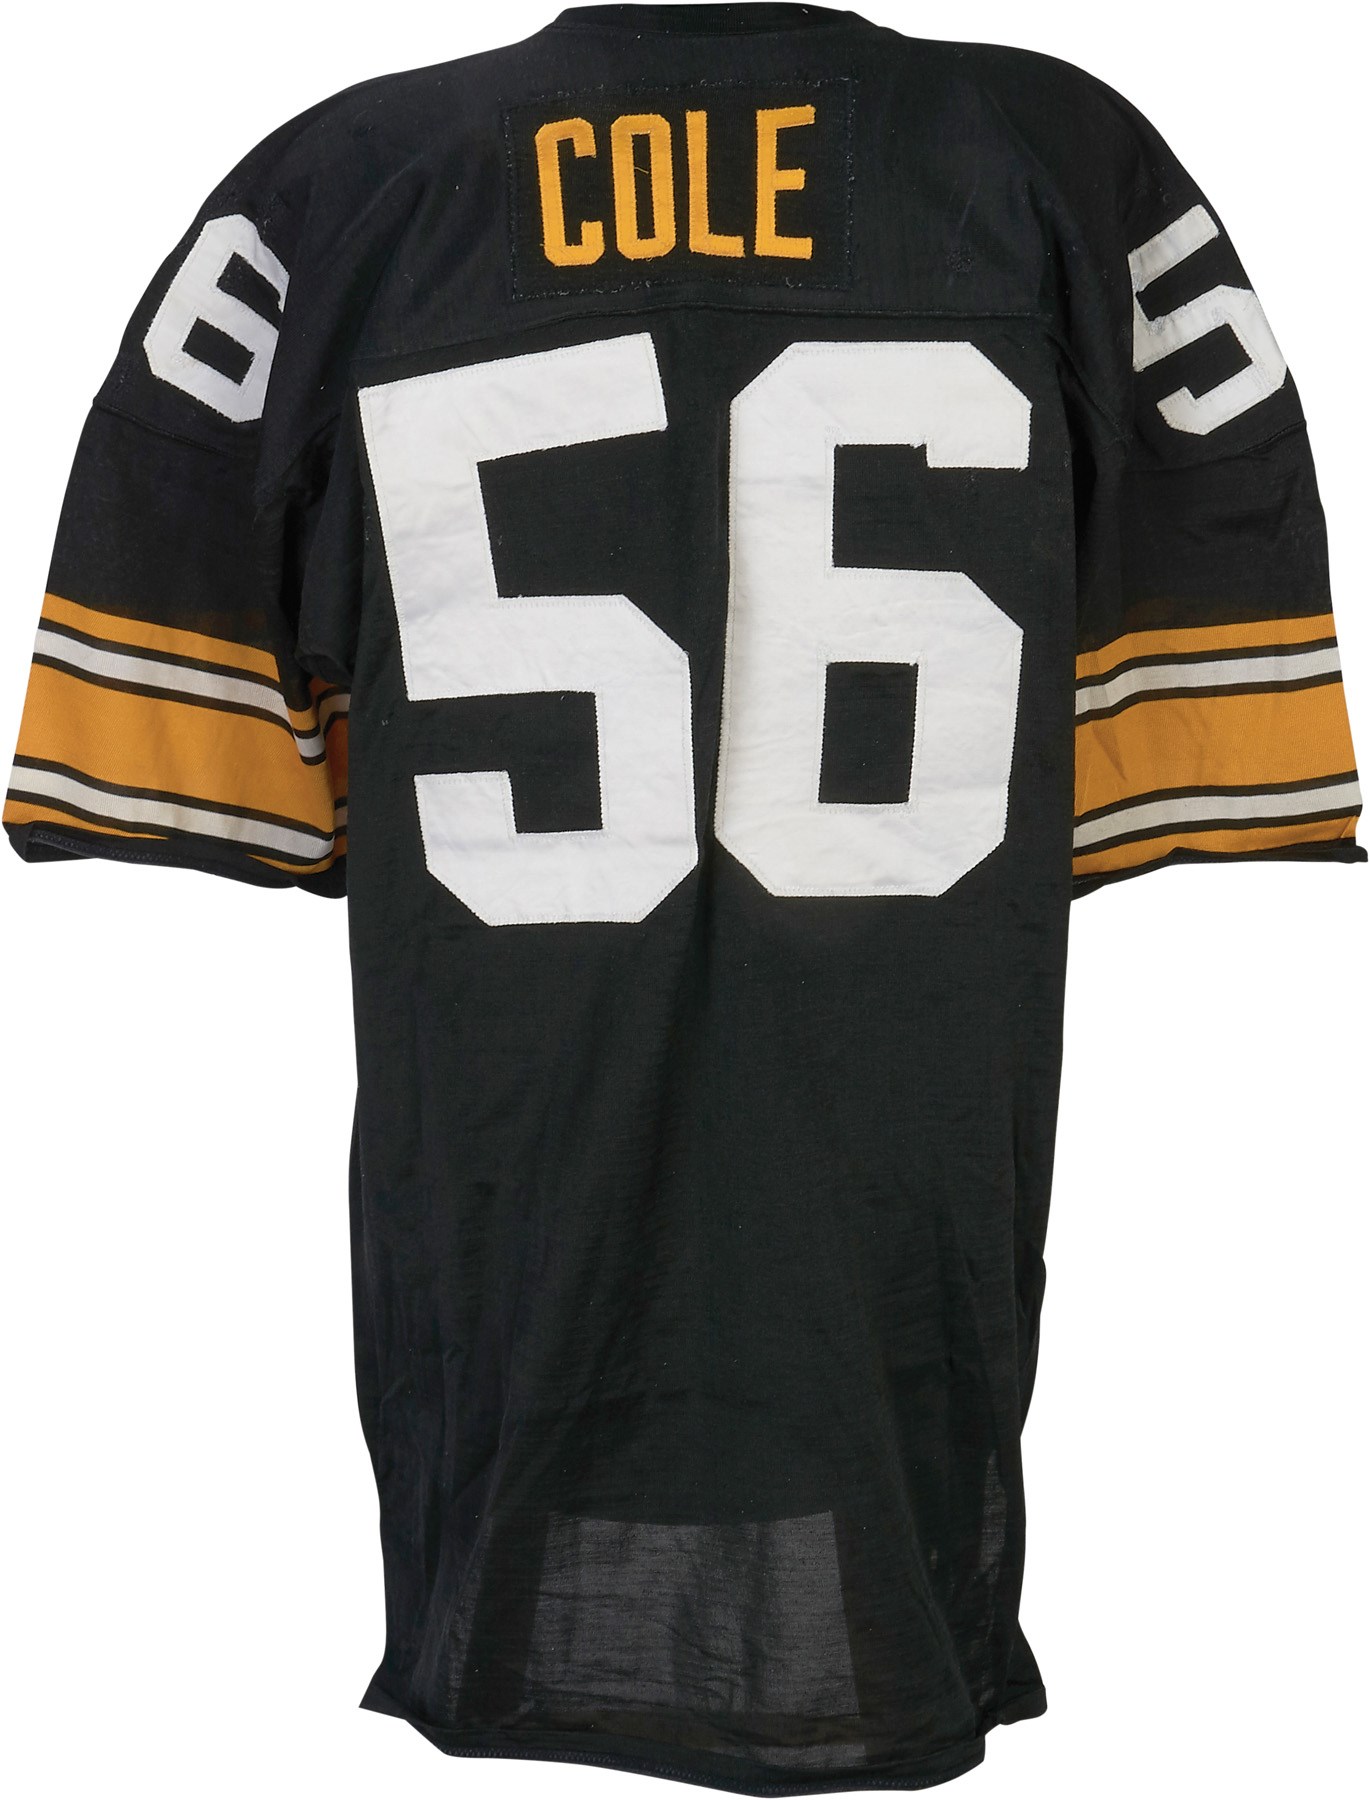 - 1980 Robin Cole Pittsburgh Steelers Game Worn Jersey (Photo-Matched to 1981 Topps)